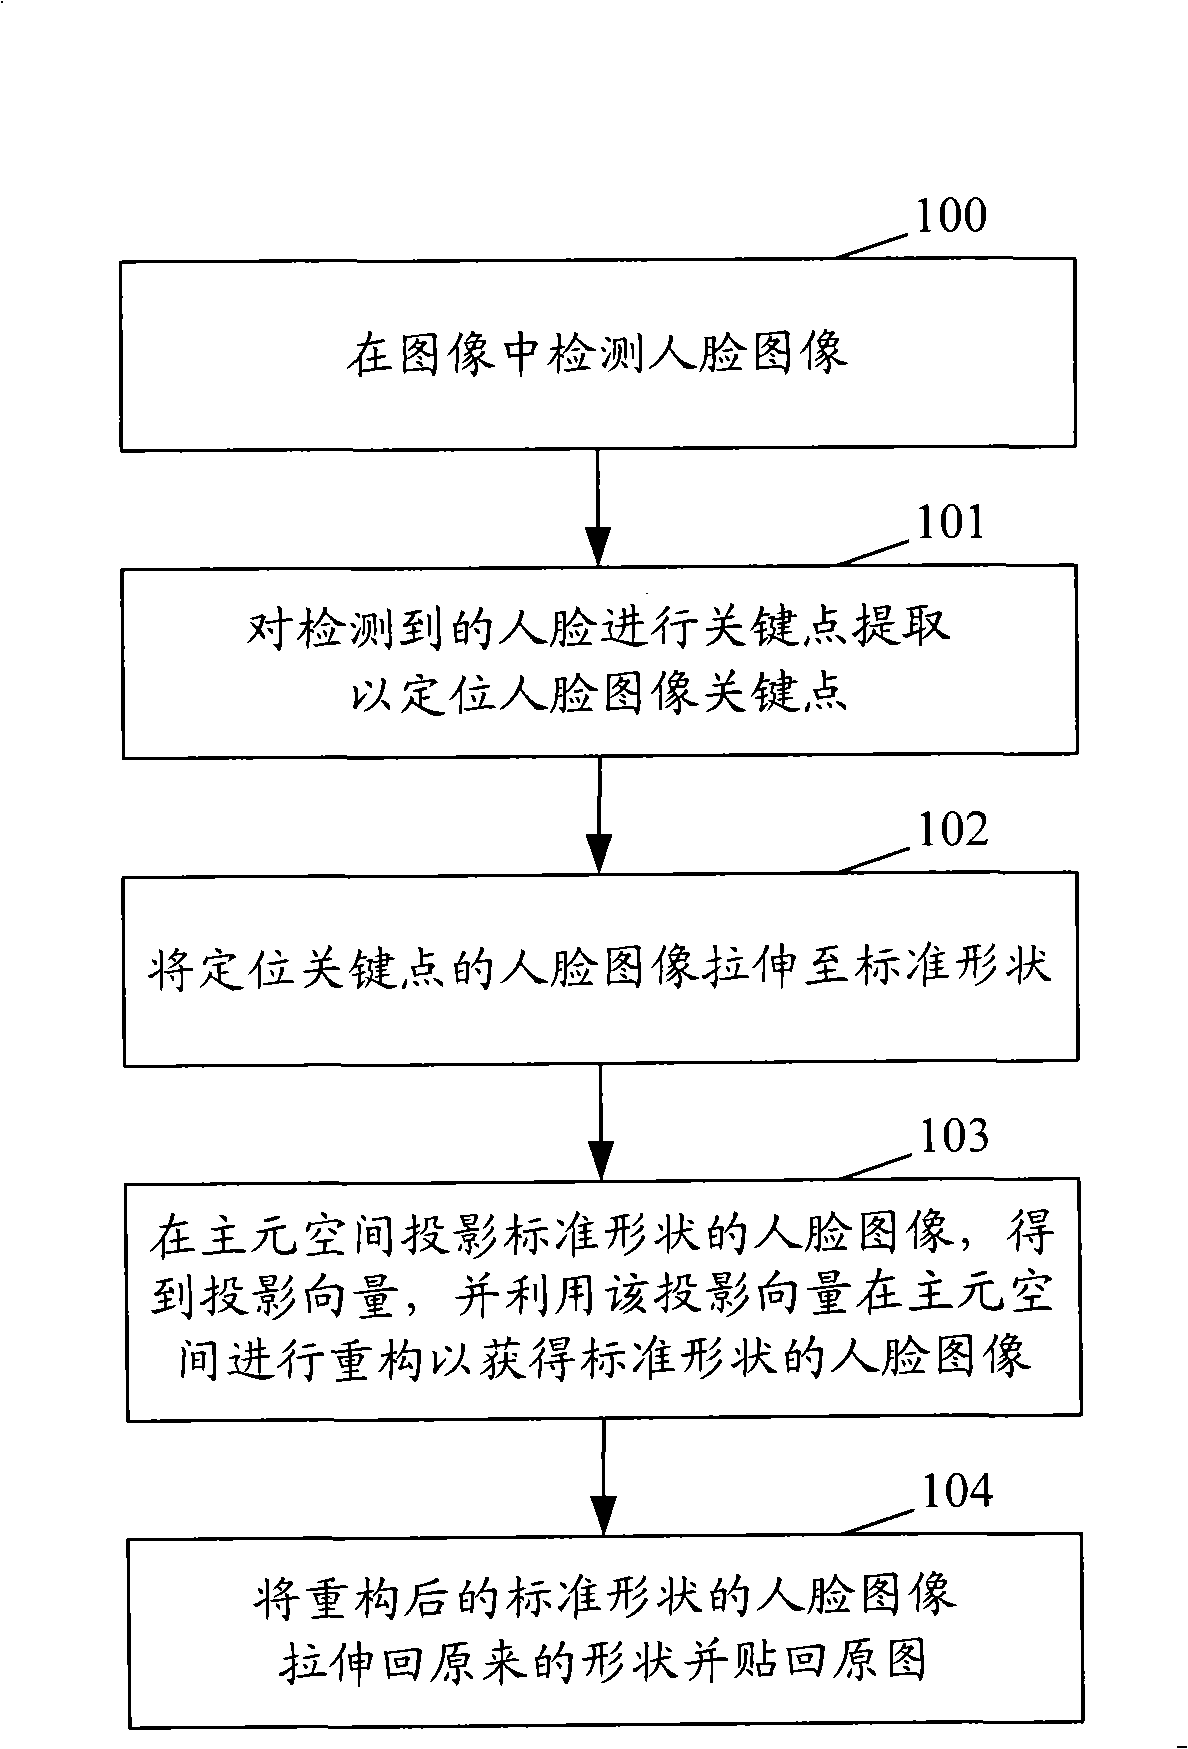 Method and device for processing human face image